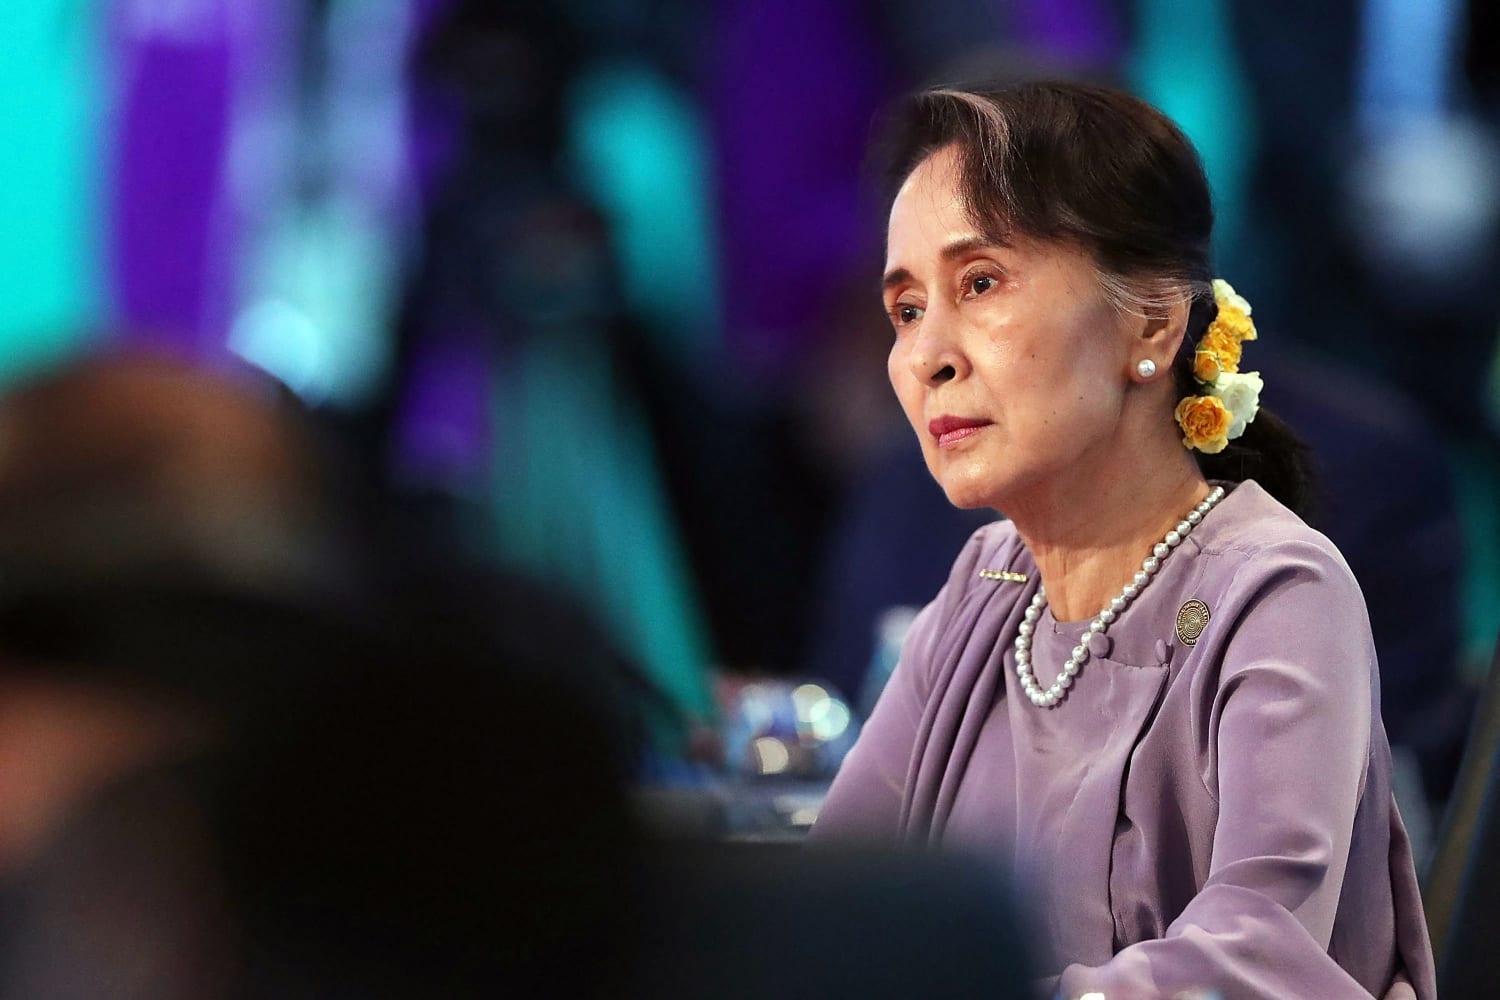 Myanmar’s ousted leader Aung San Suu Kyi sentenced to 4 years in prison